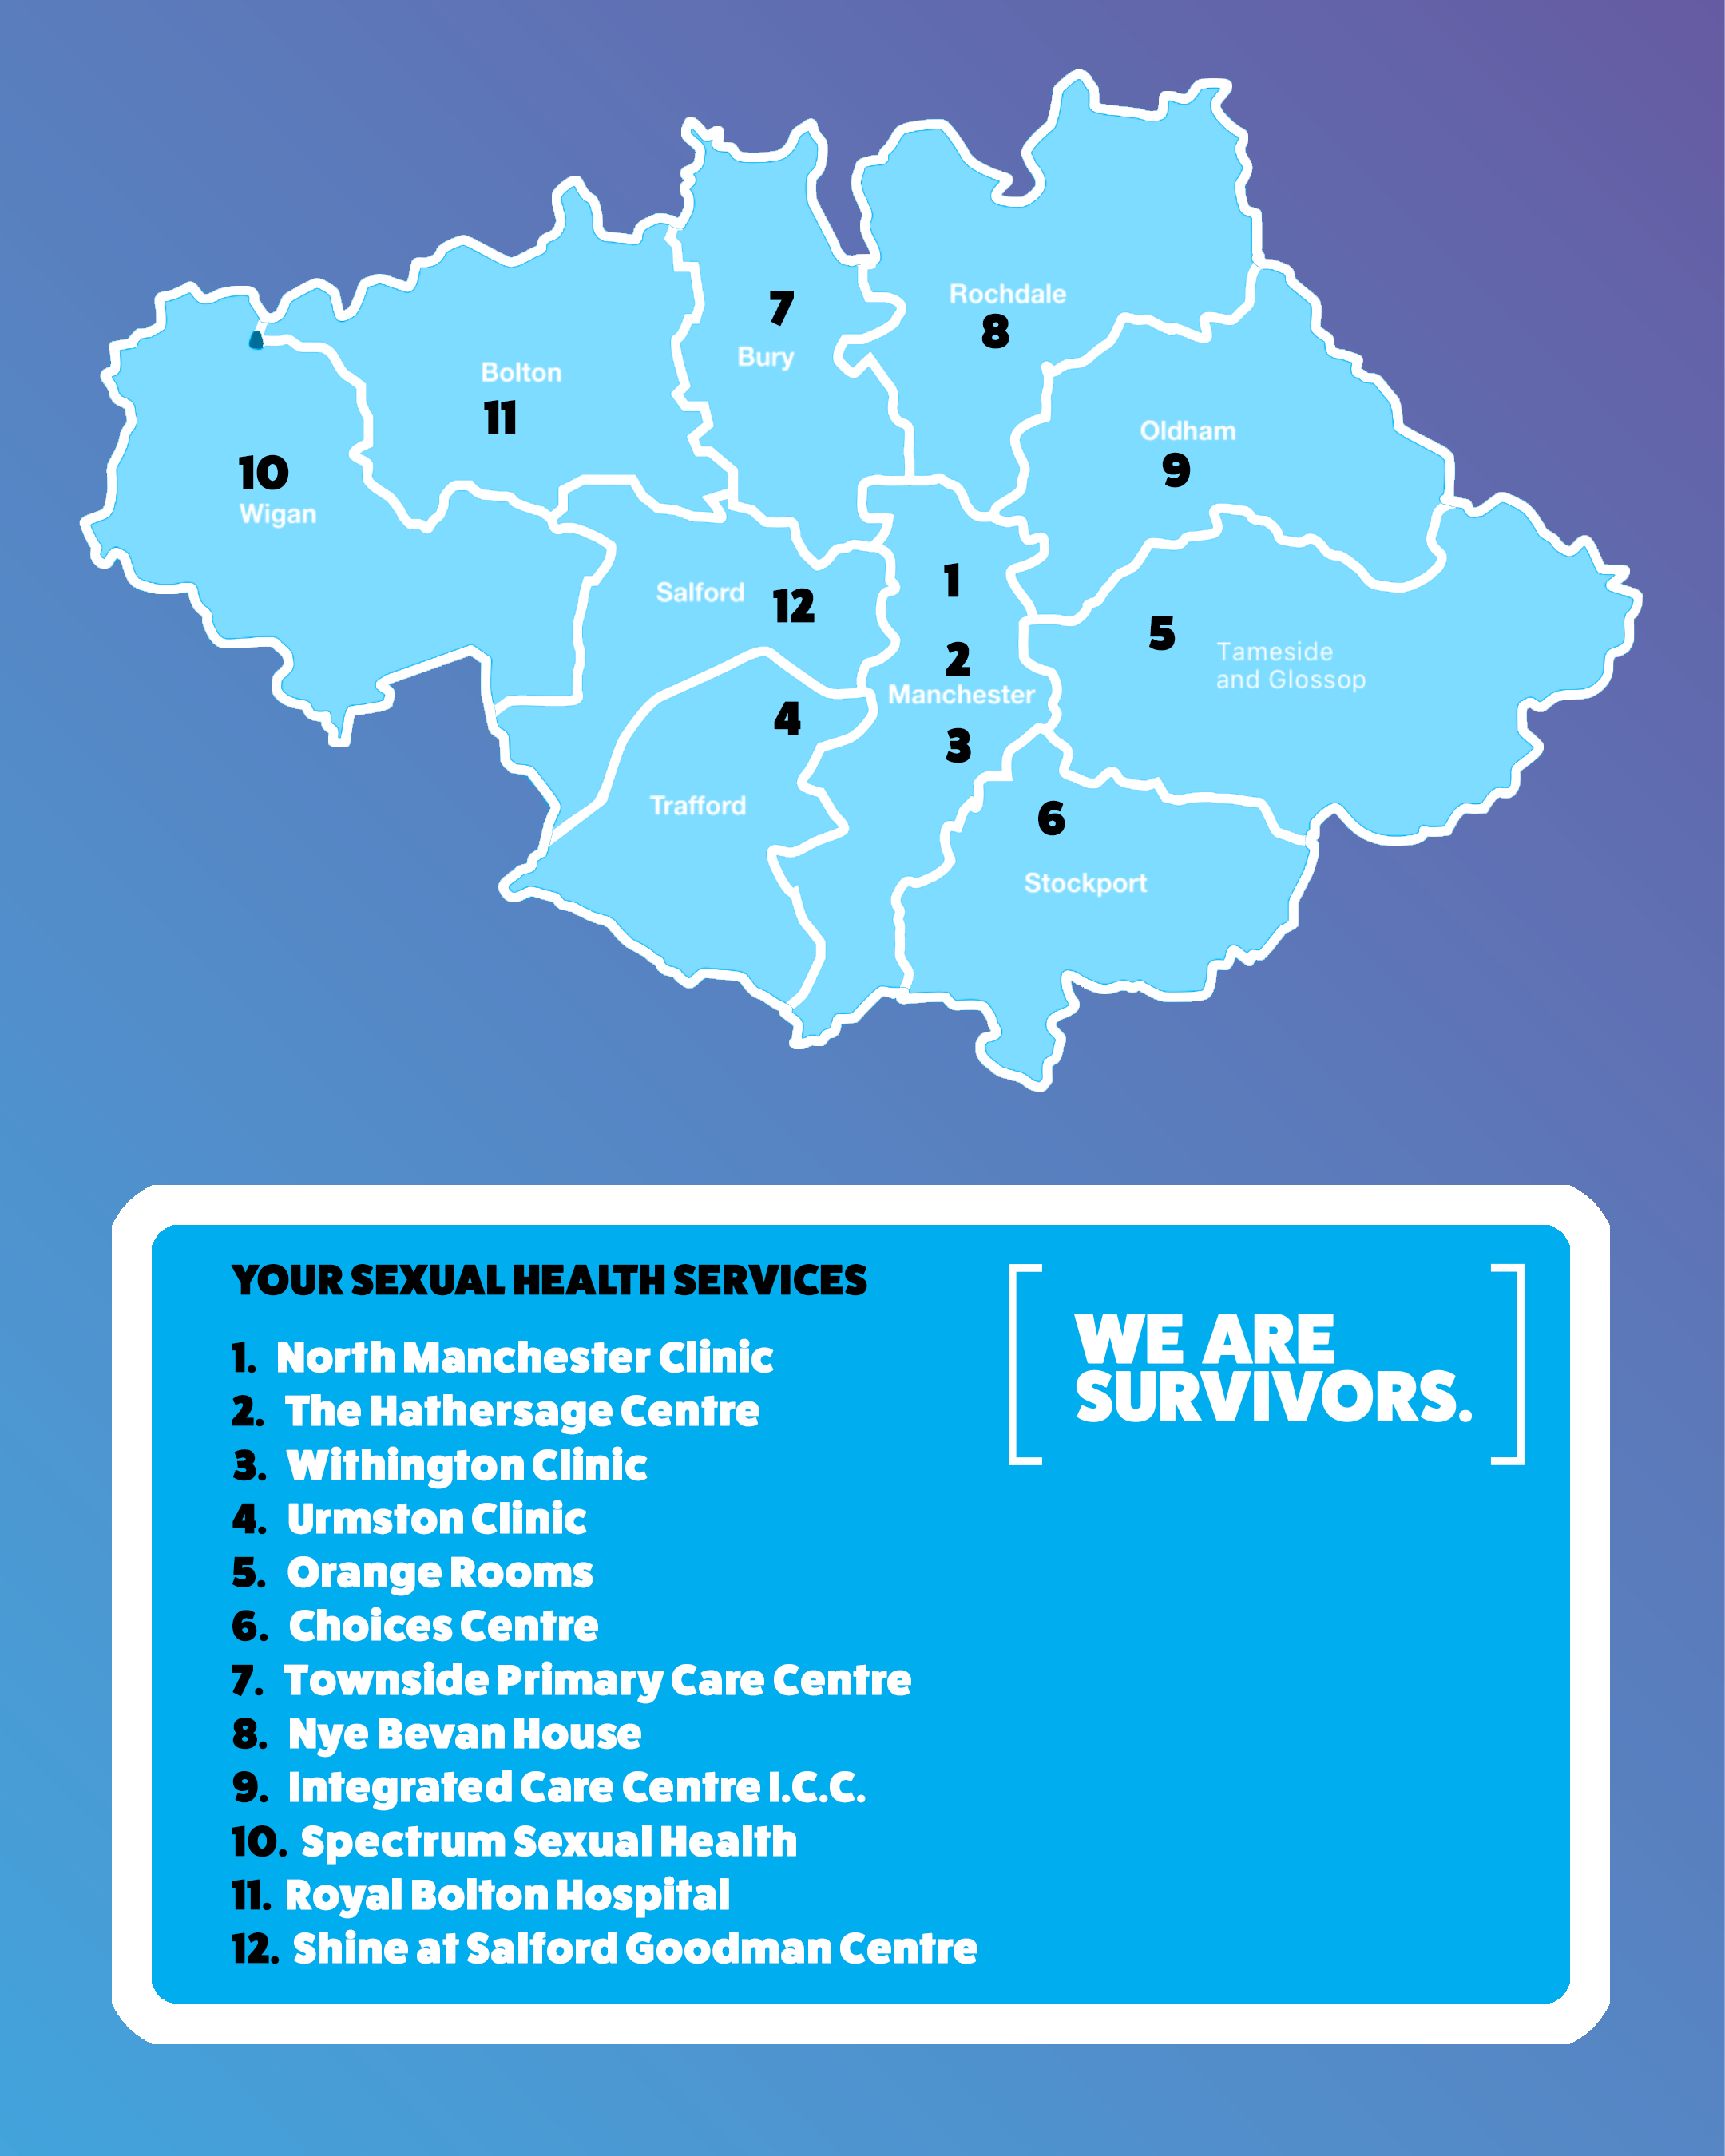 A map showing sexual health clinics